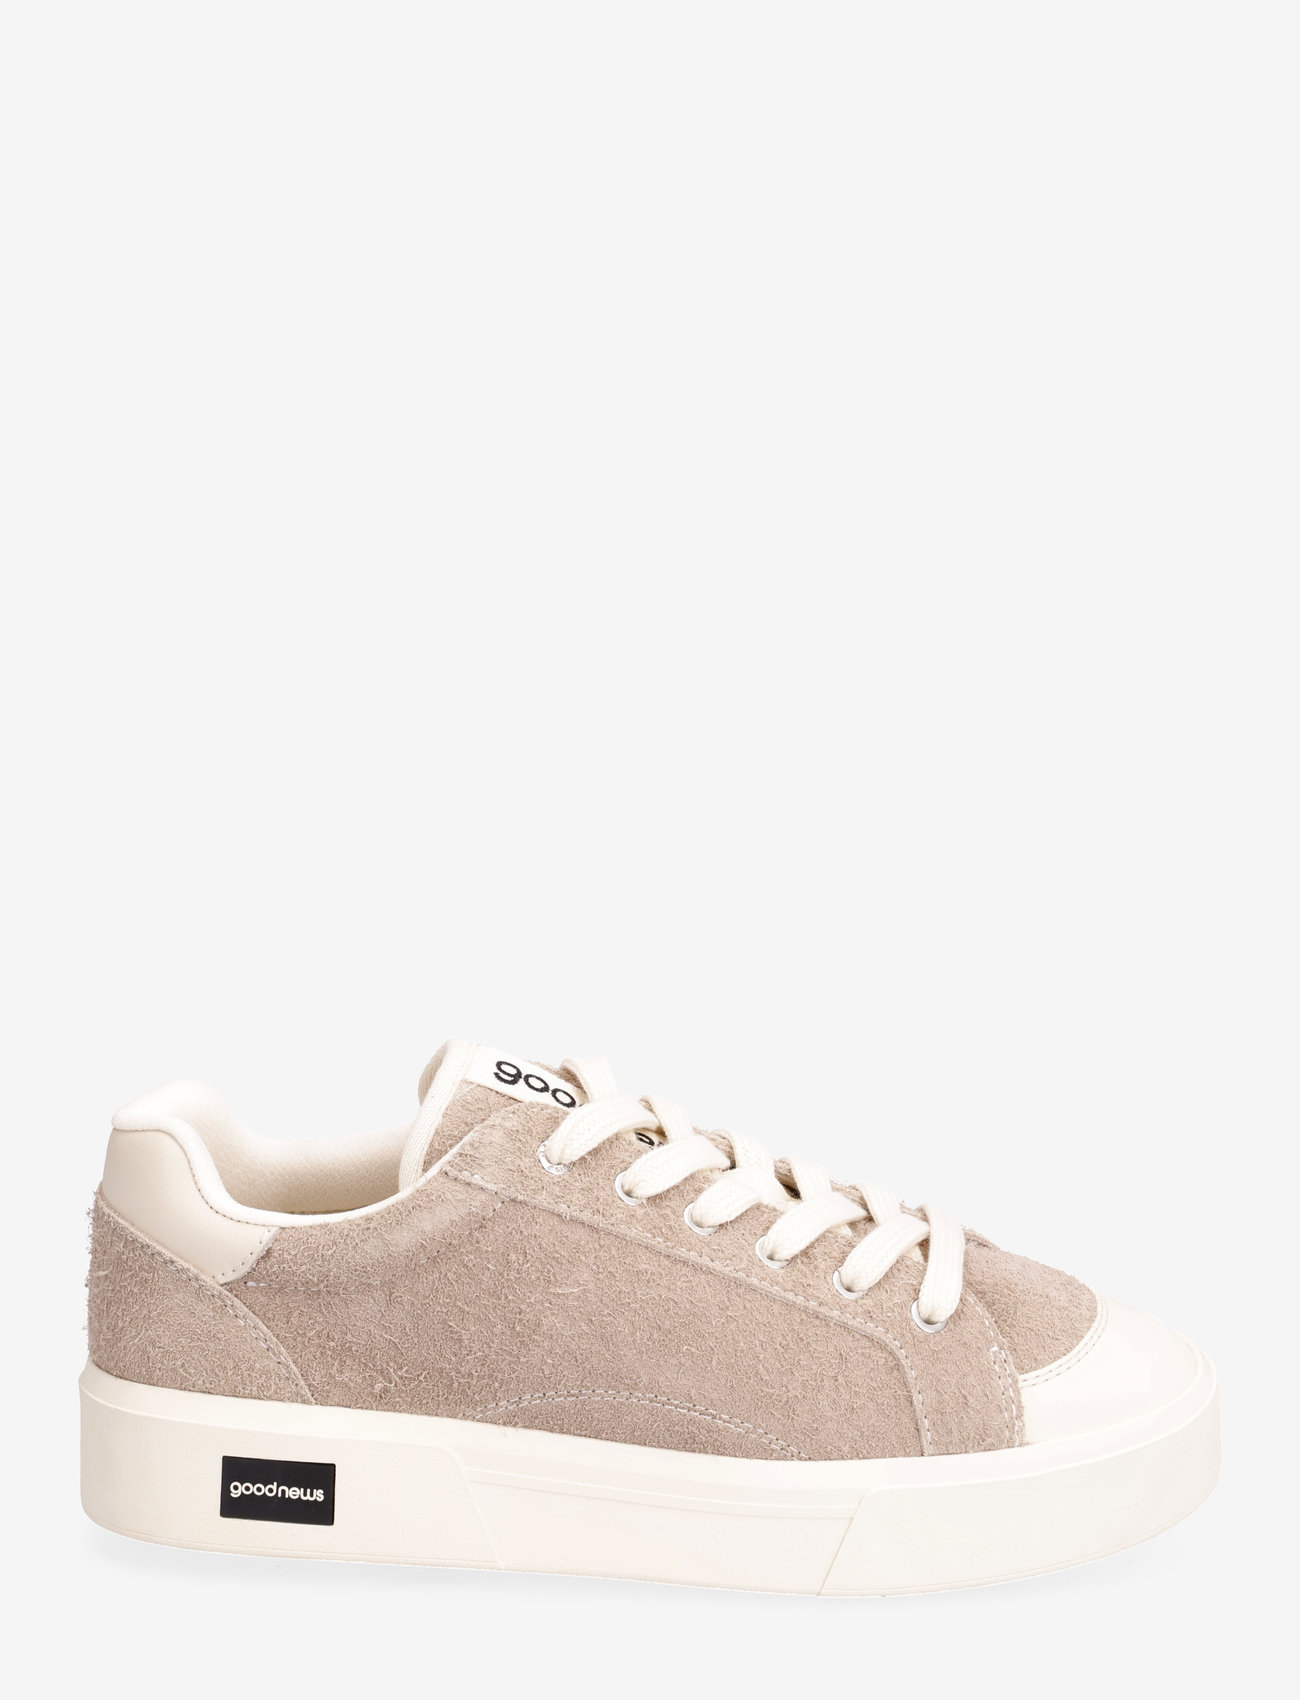 Good News - OPAL - low top sneakers - taupe - 1